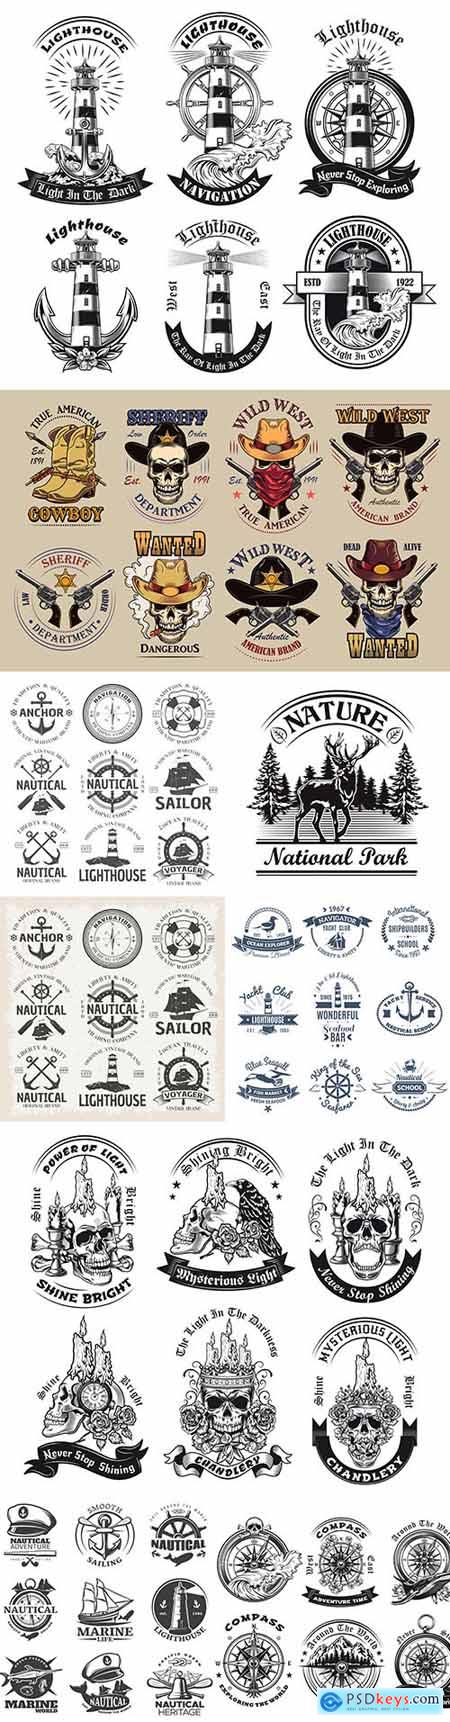 Marine world and Wild West set of labels and logos